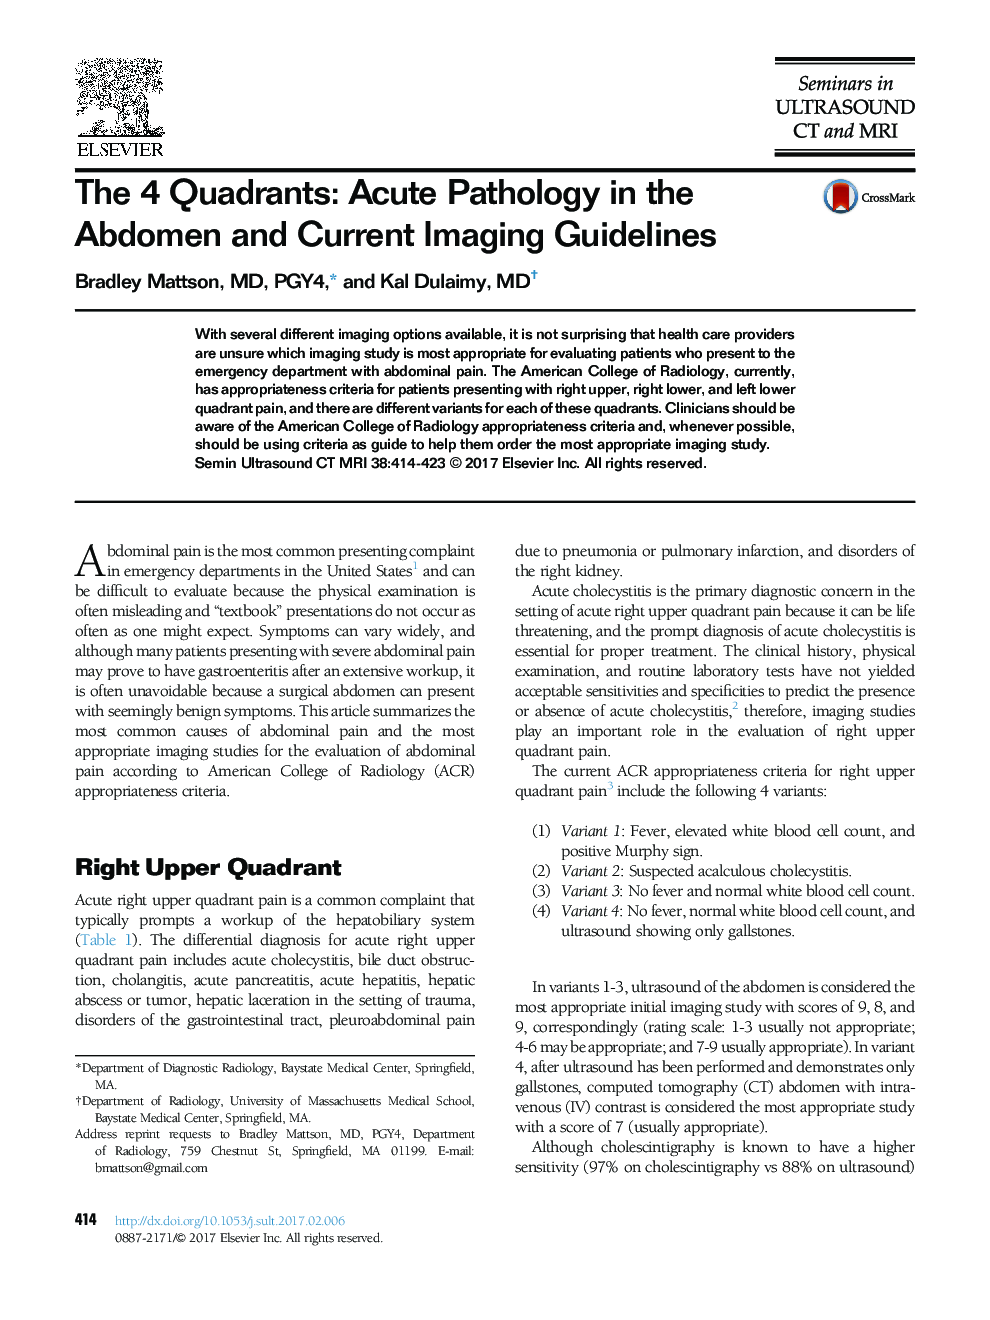 The 4 Quadrants: Acute Pathology in the Abdomen and Current Imaging Guidelines